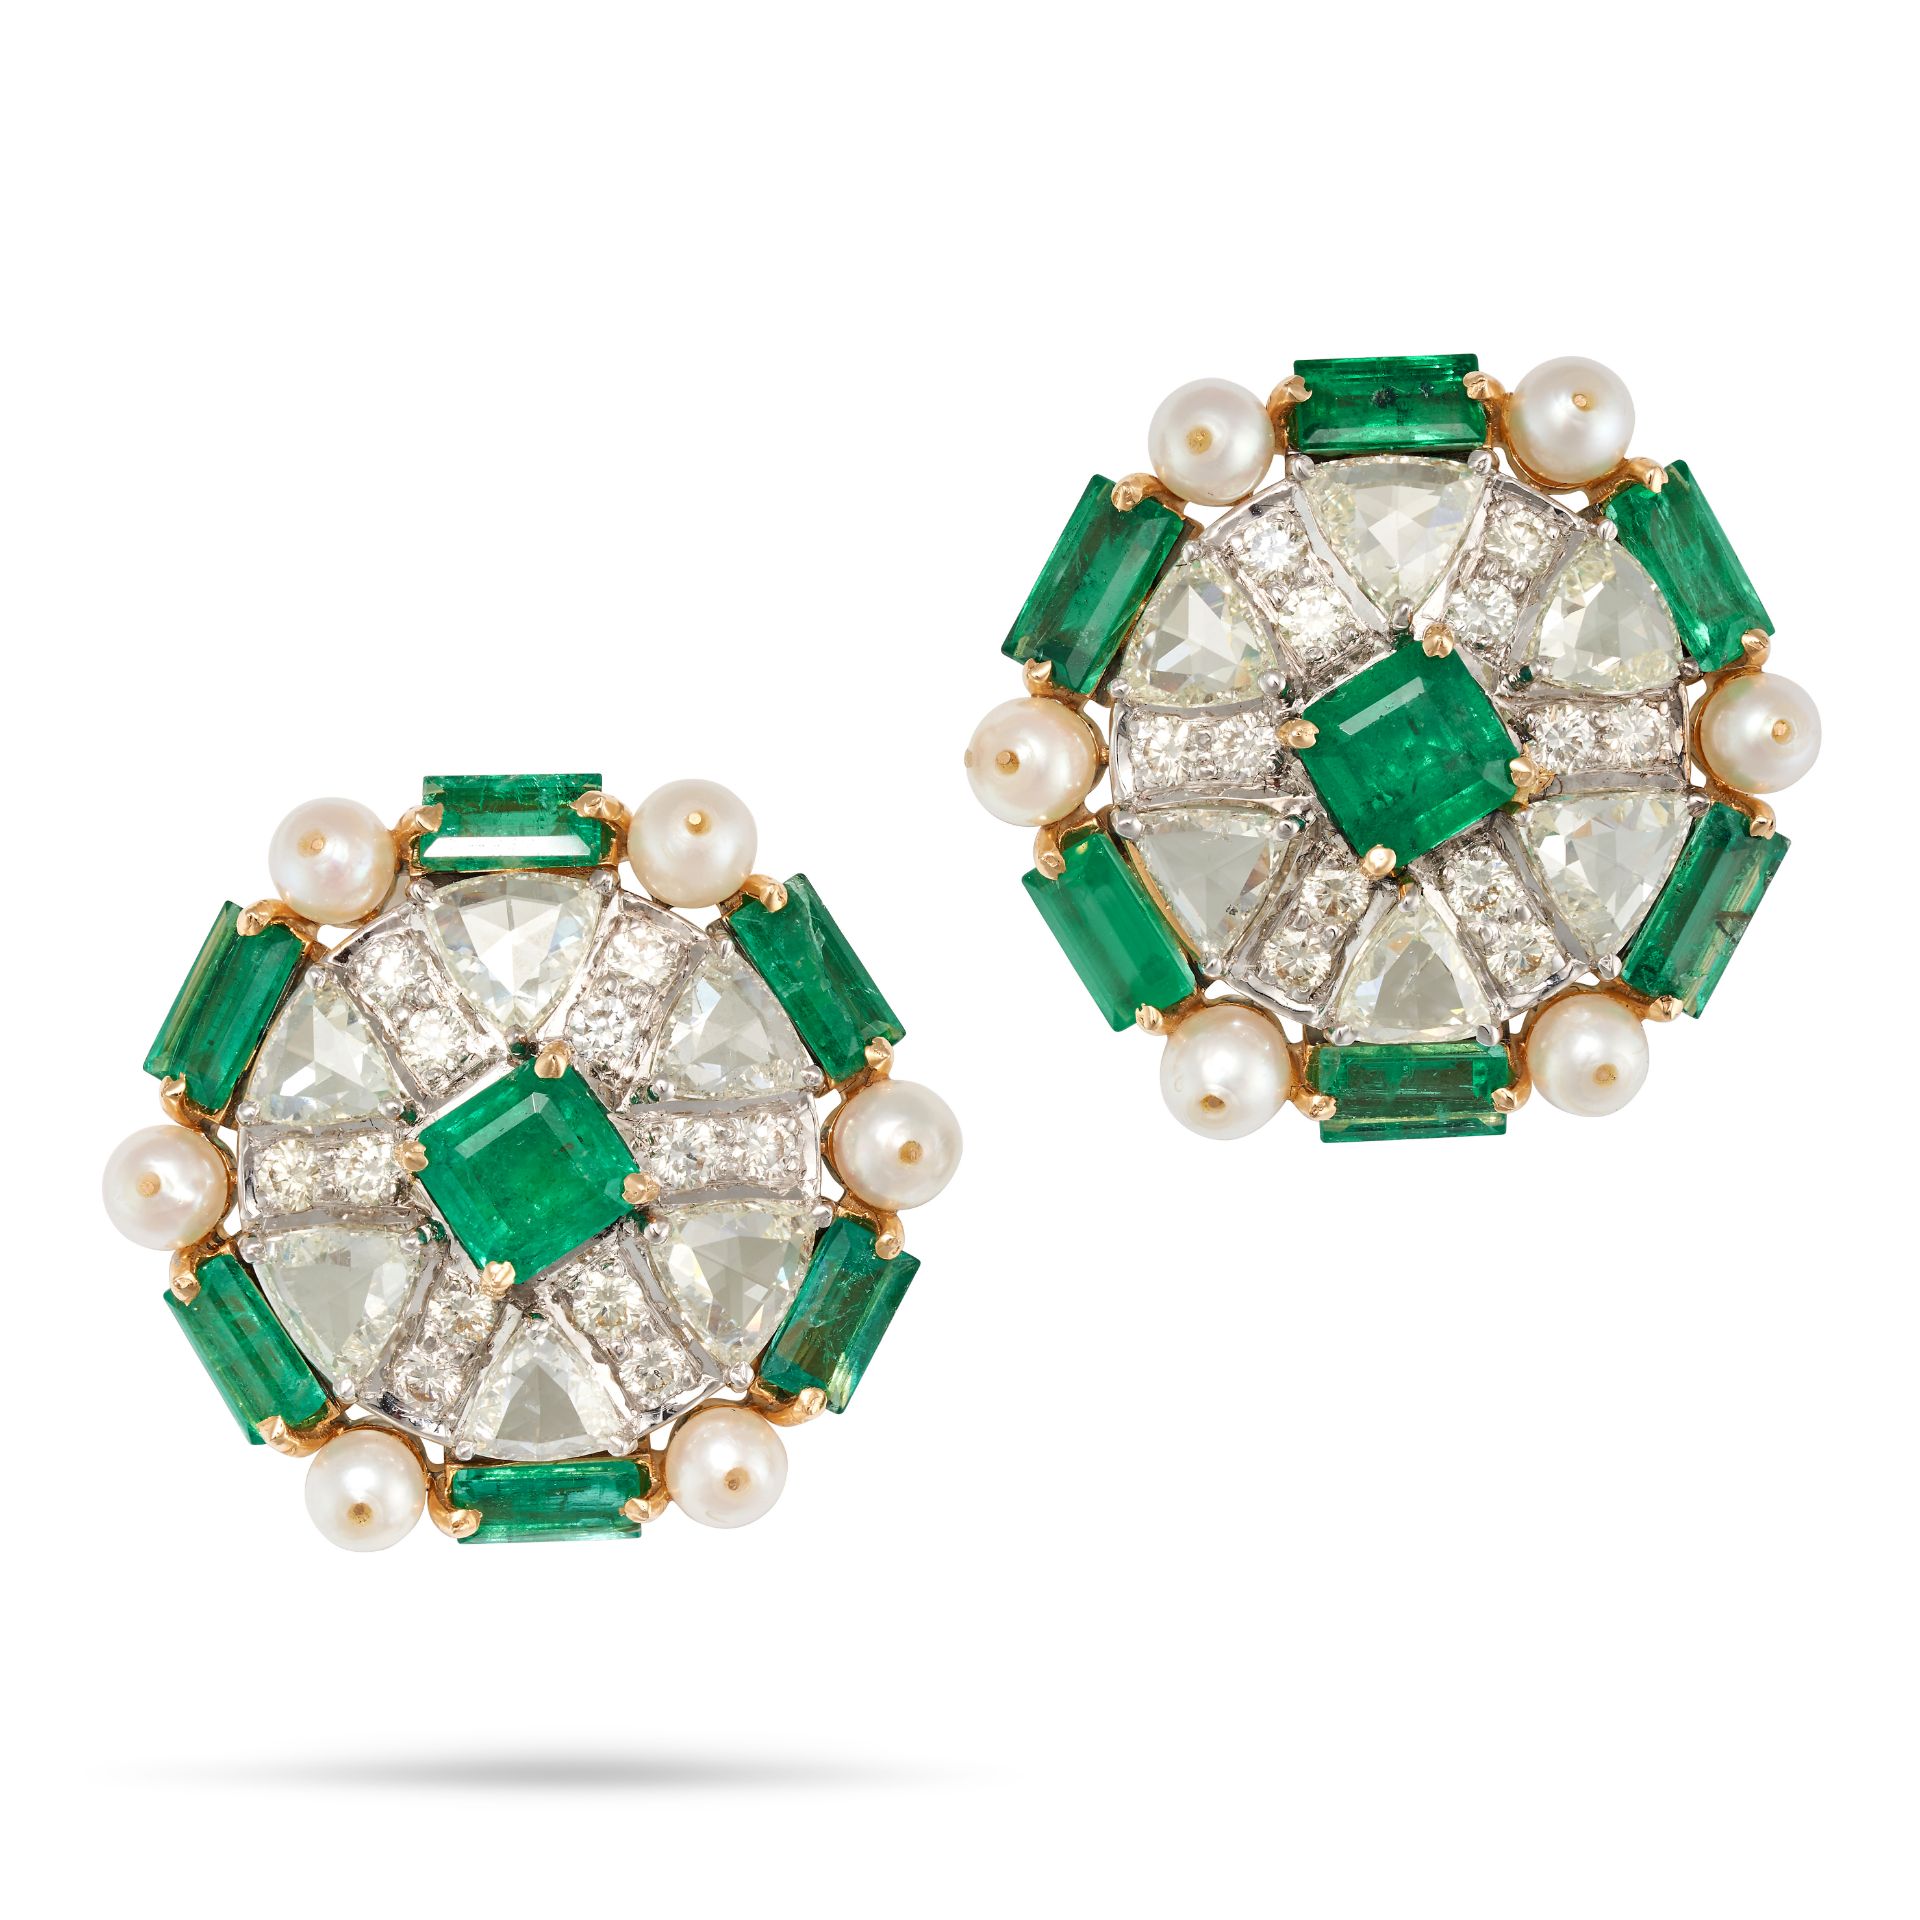 A PAIR OF EMERALD, DIAMOND AND PEARL EARRINGS in yellow and white gold, each set with an octagona...